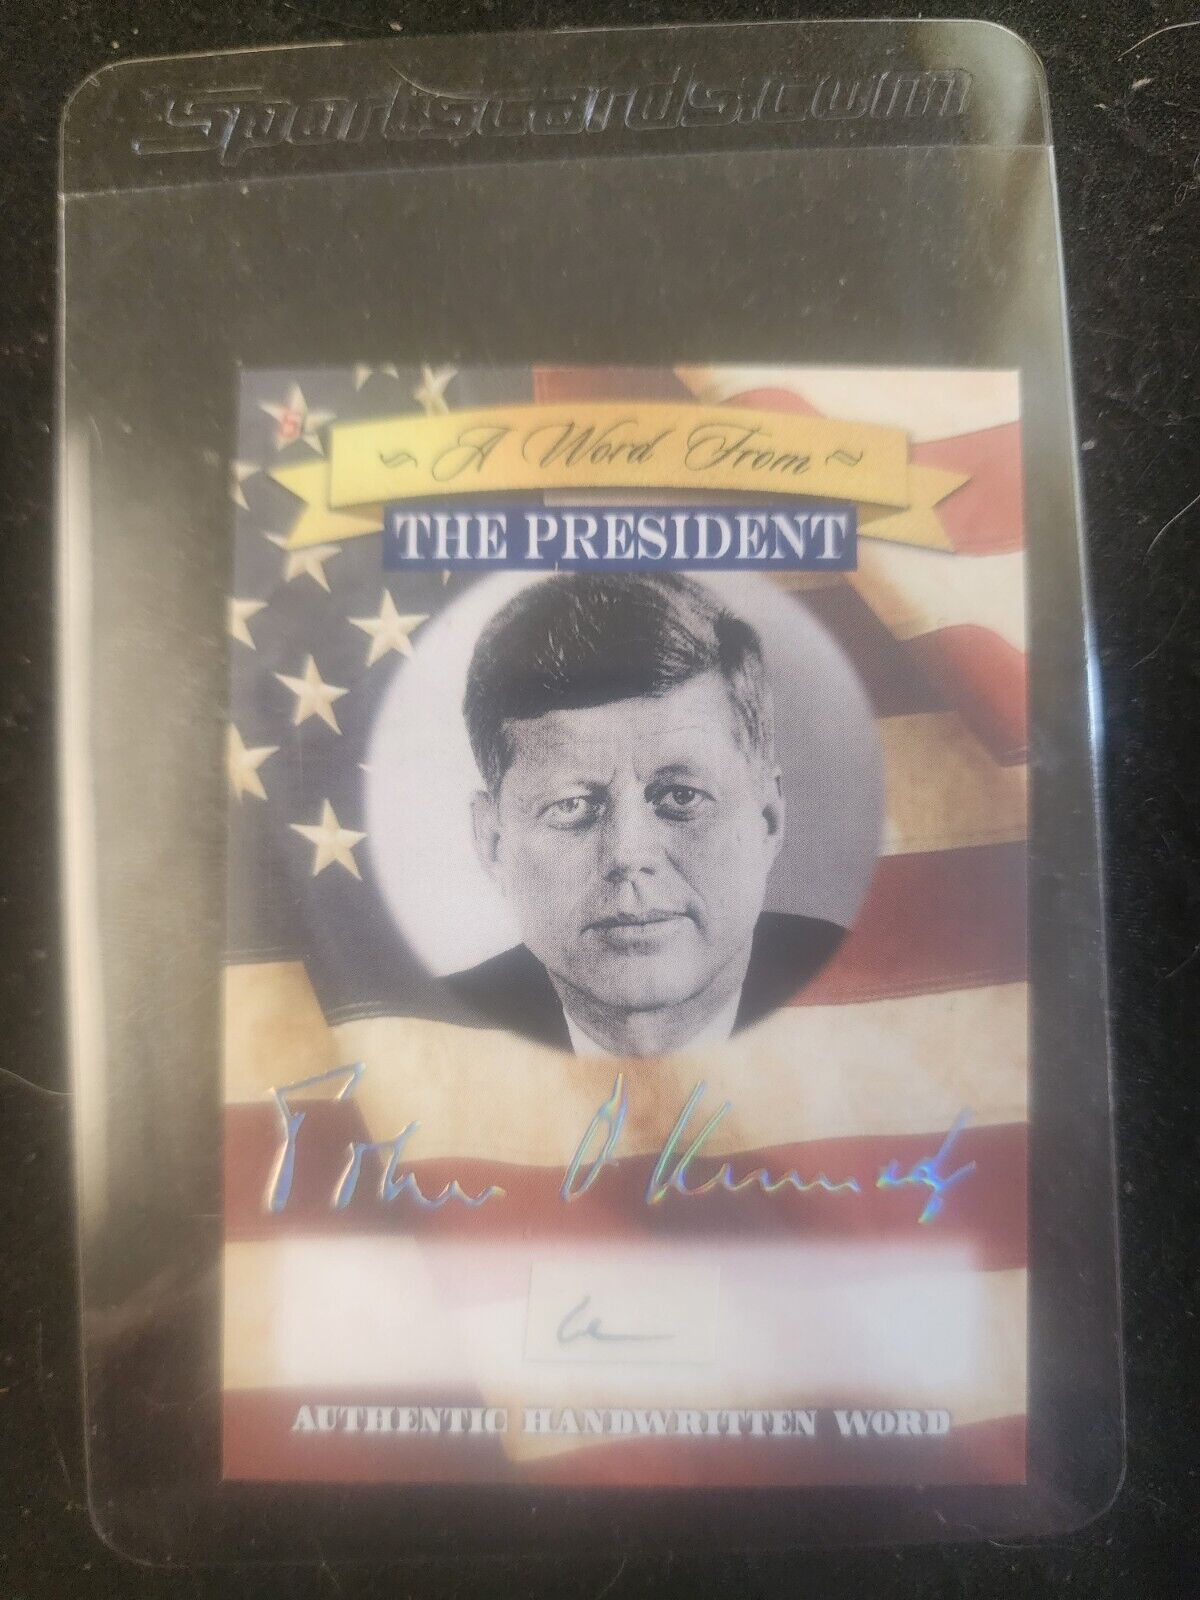 2020 potus a word from the president John F Kenedy Authentic Hand Written Word